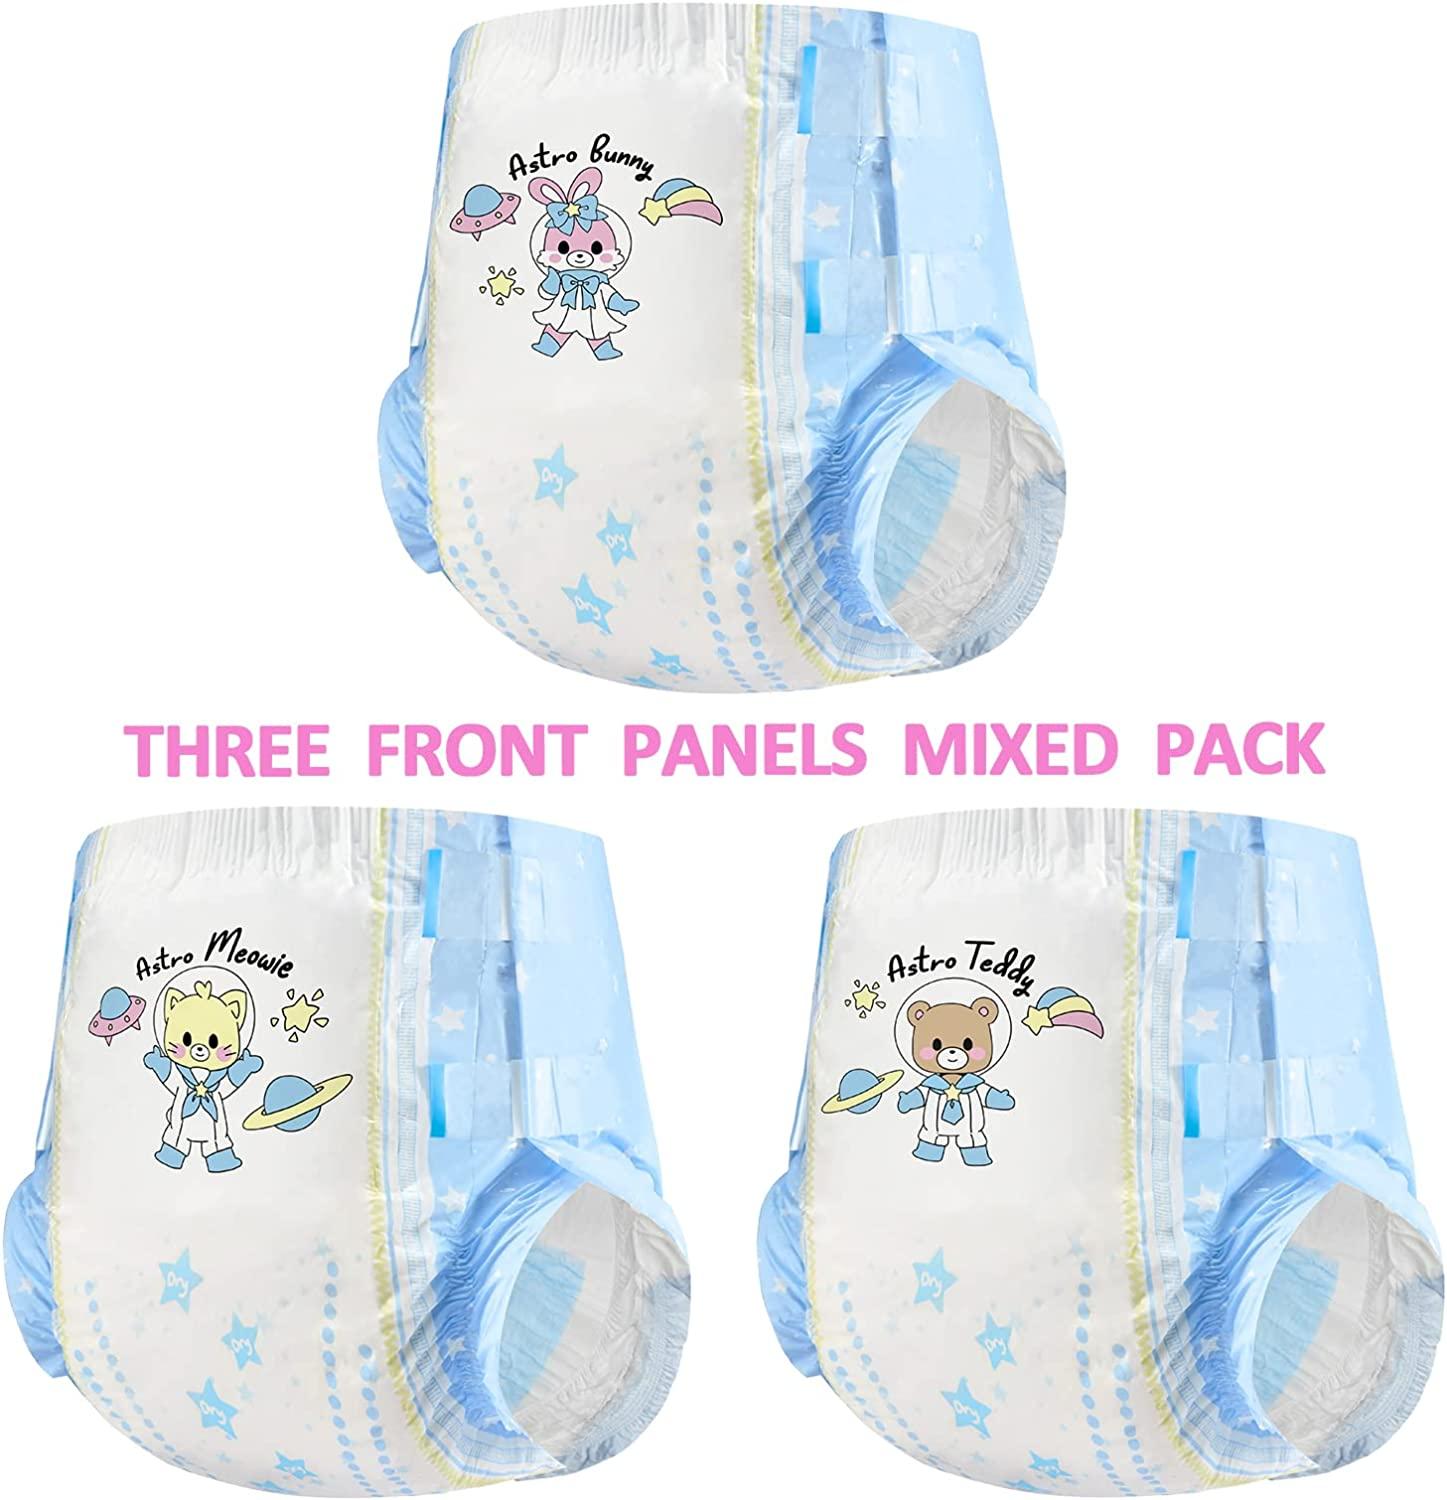  Littleforbig Adult Printed Diaper 10 Pieces - Little